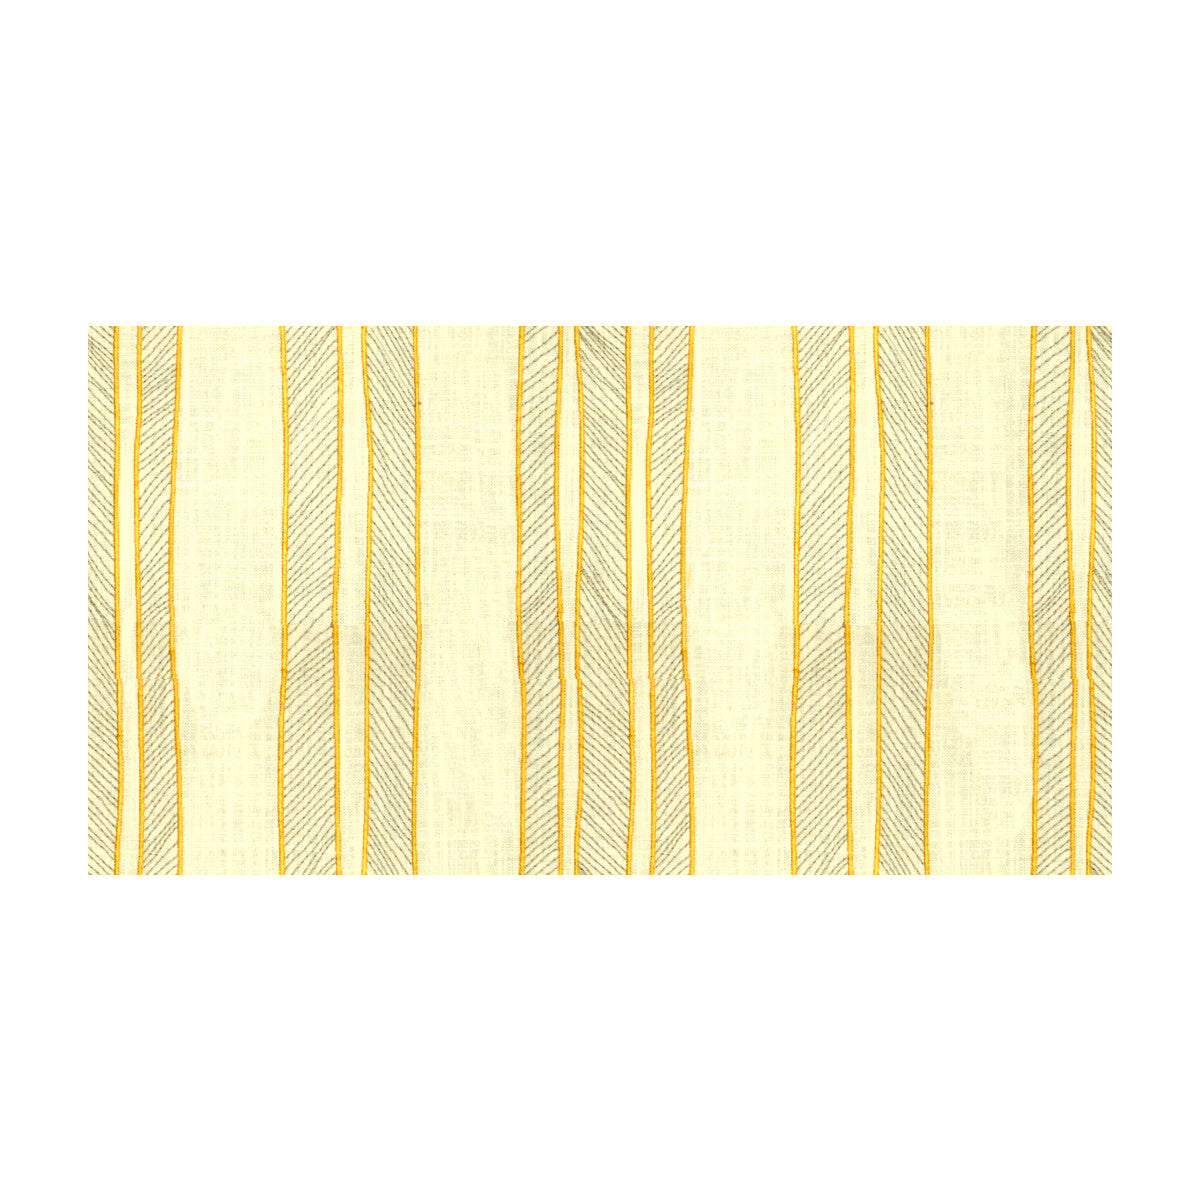 Cords fabric in sunshine color - pattern PF50387.3.0 - by Baker Lifestyle in the Waterside collection